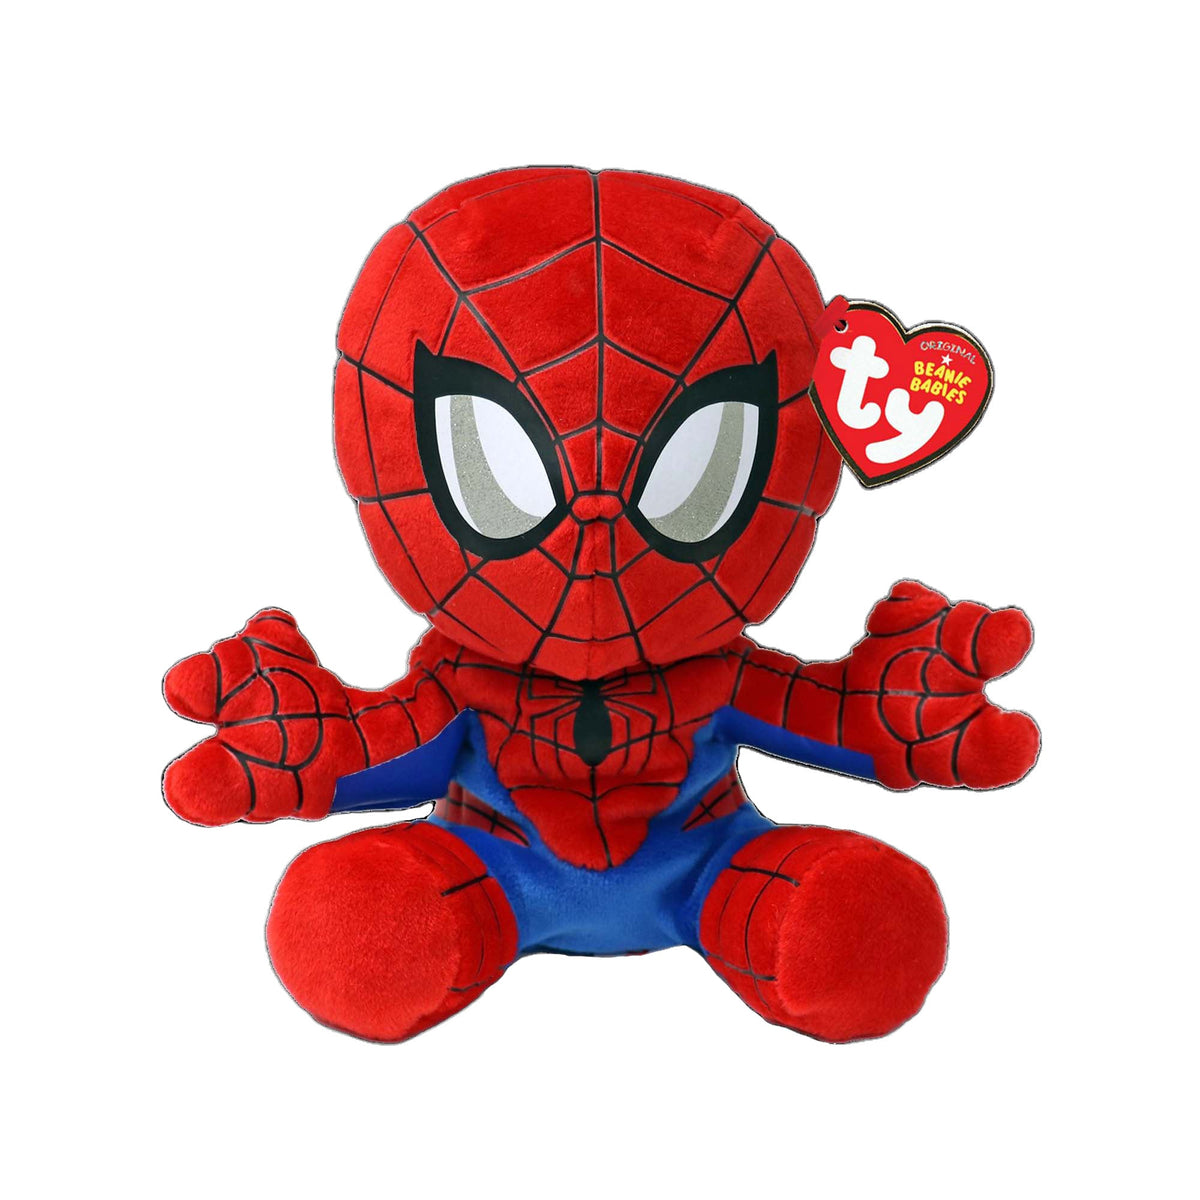 TY INC Plushes TY Marvel Soft Plush, Spider-Man, 1 Count 008421440078